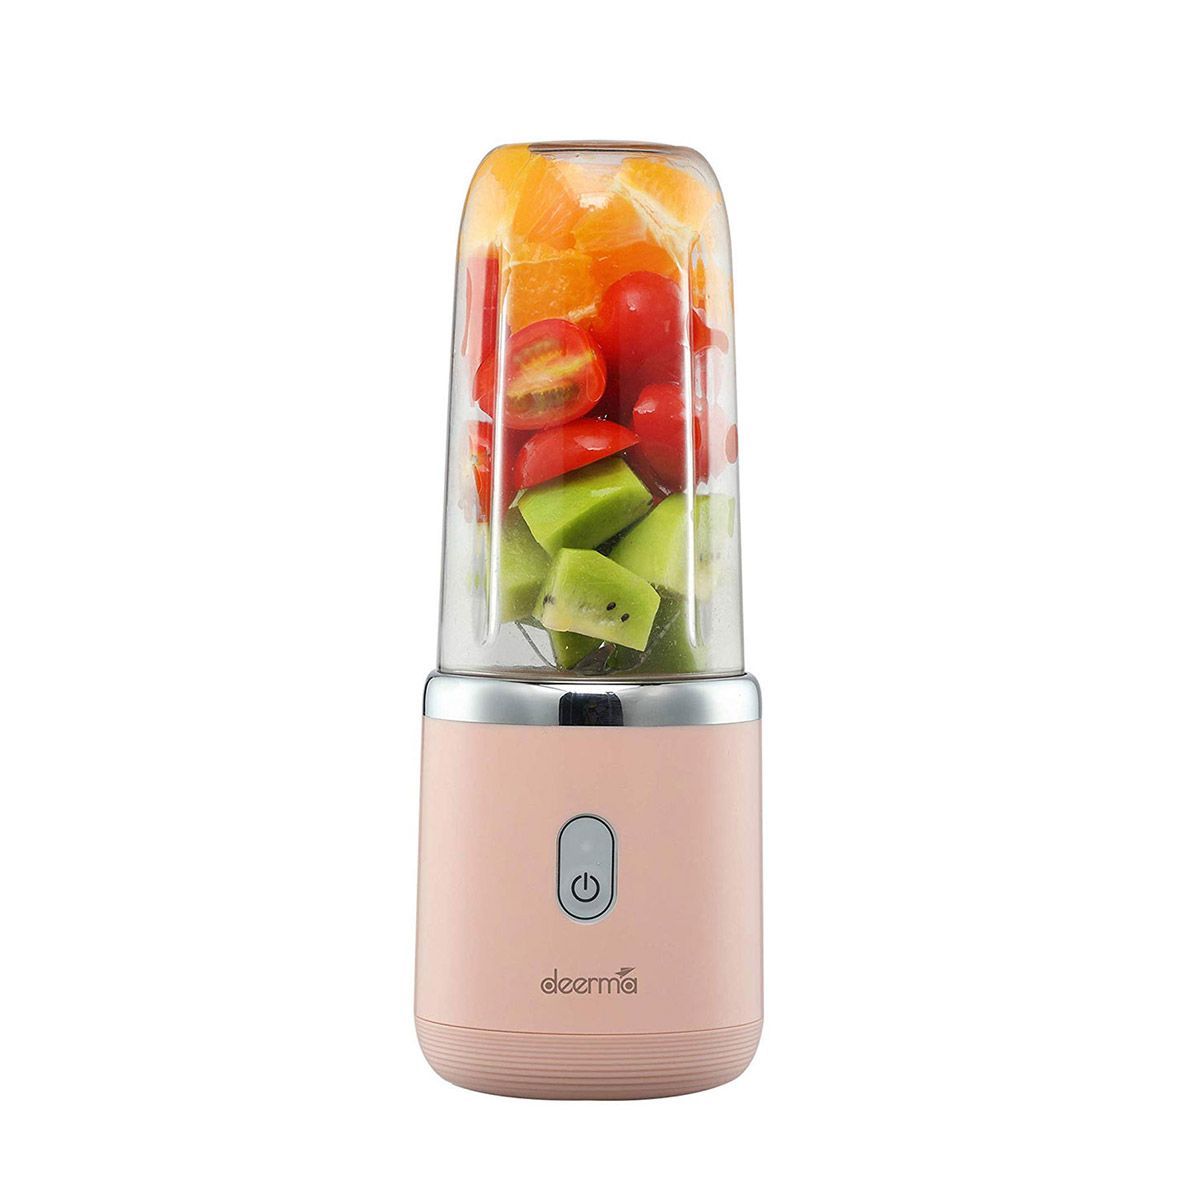 Deerma NU05 Personal Power Blender with Rechargeable Li-ion Battery